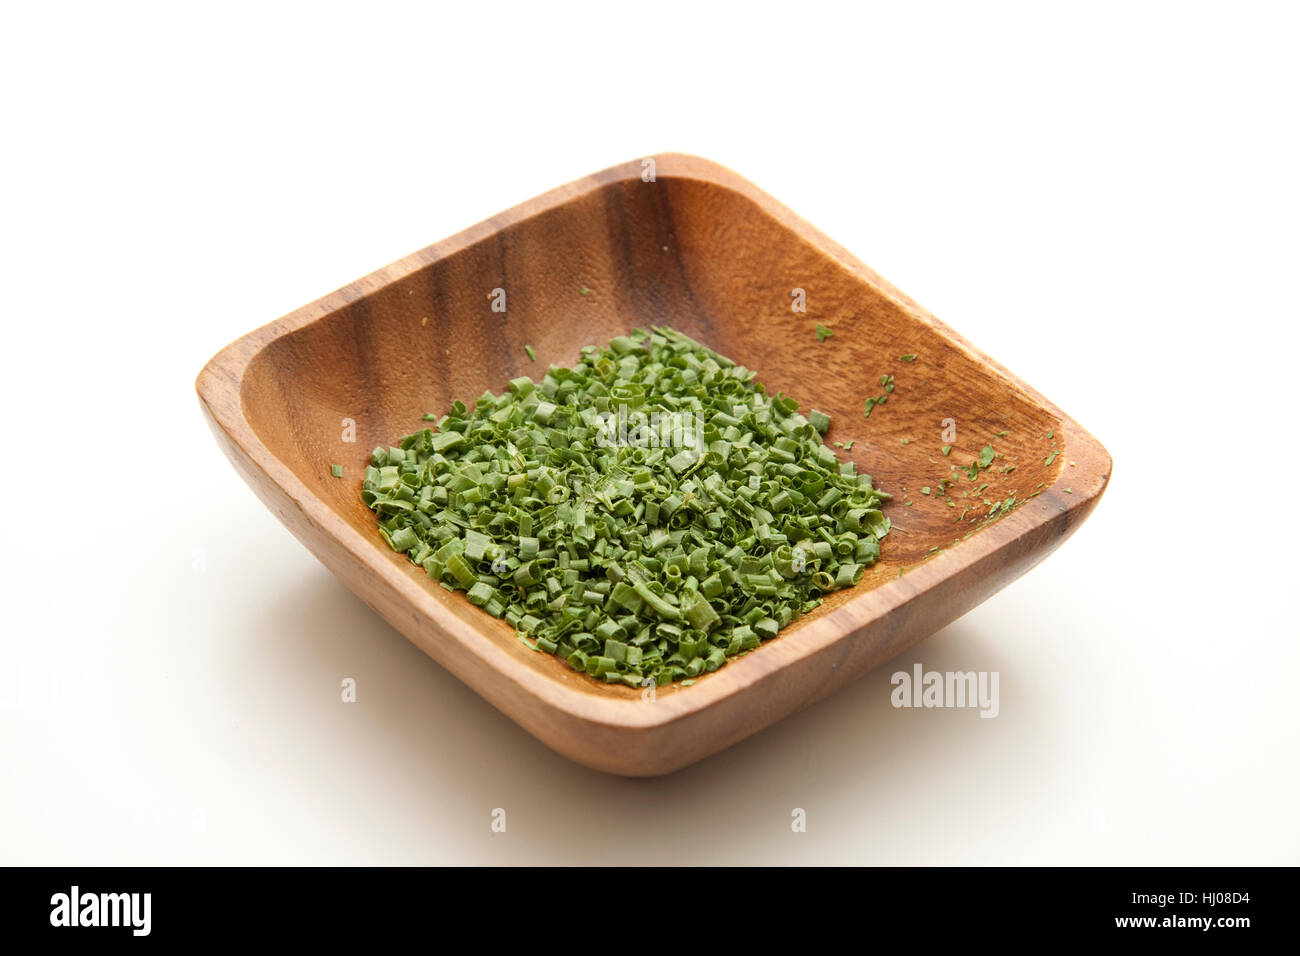 parsley, chives, chive, herbs, food, aliment, dried, parsley, chives, chive, Stock Photo